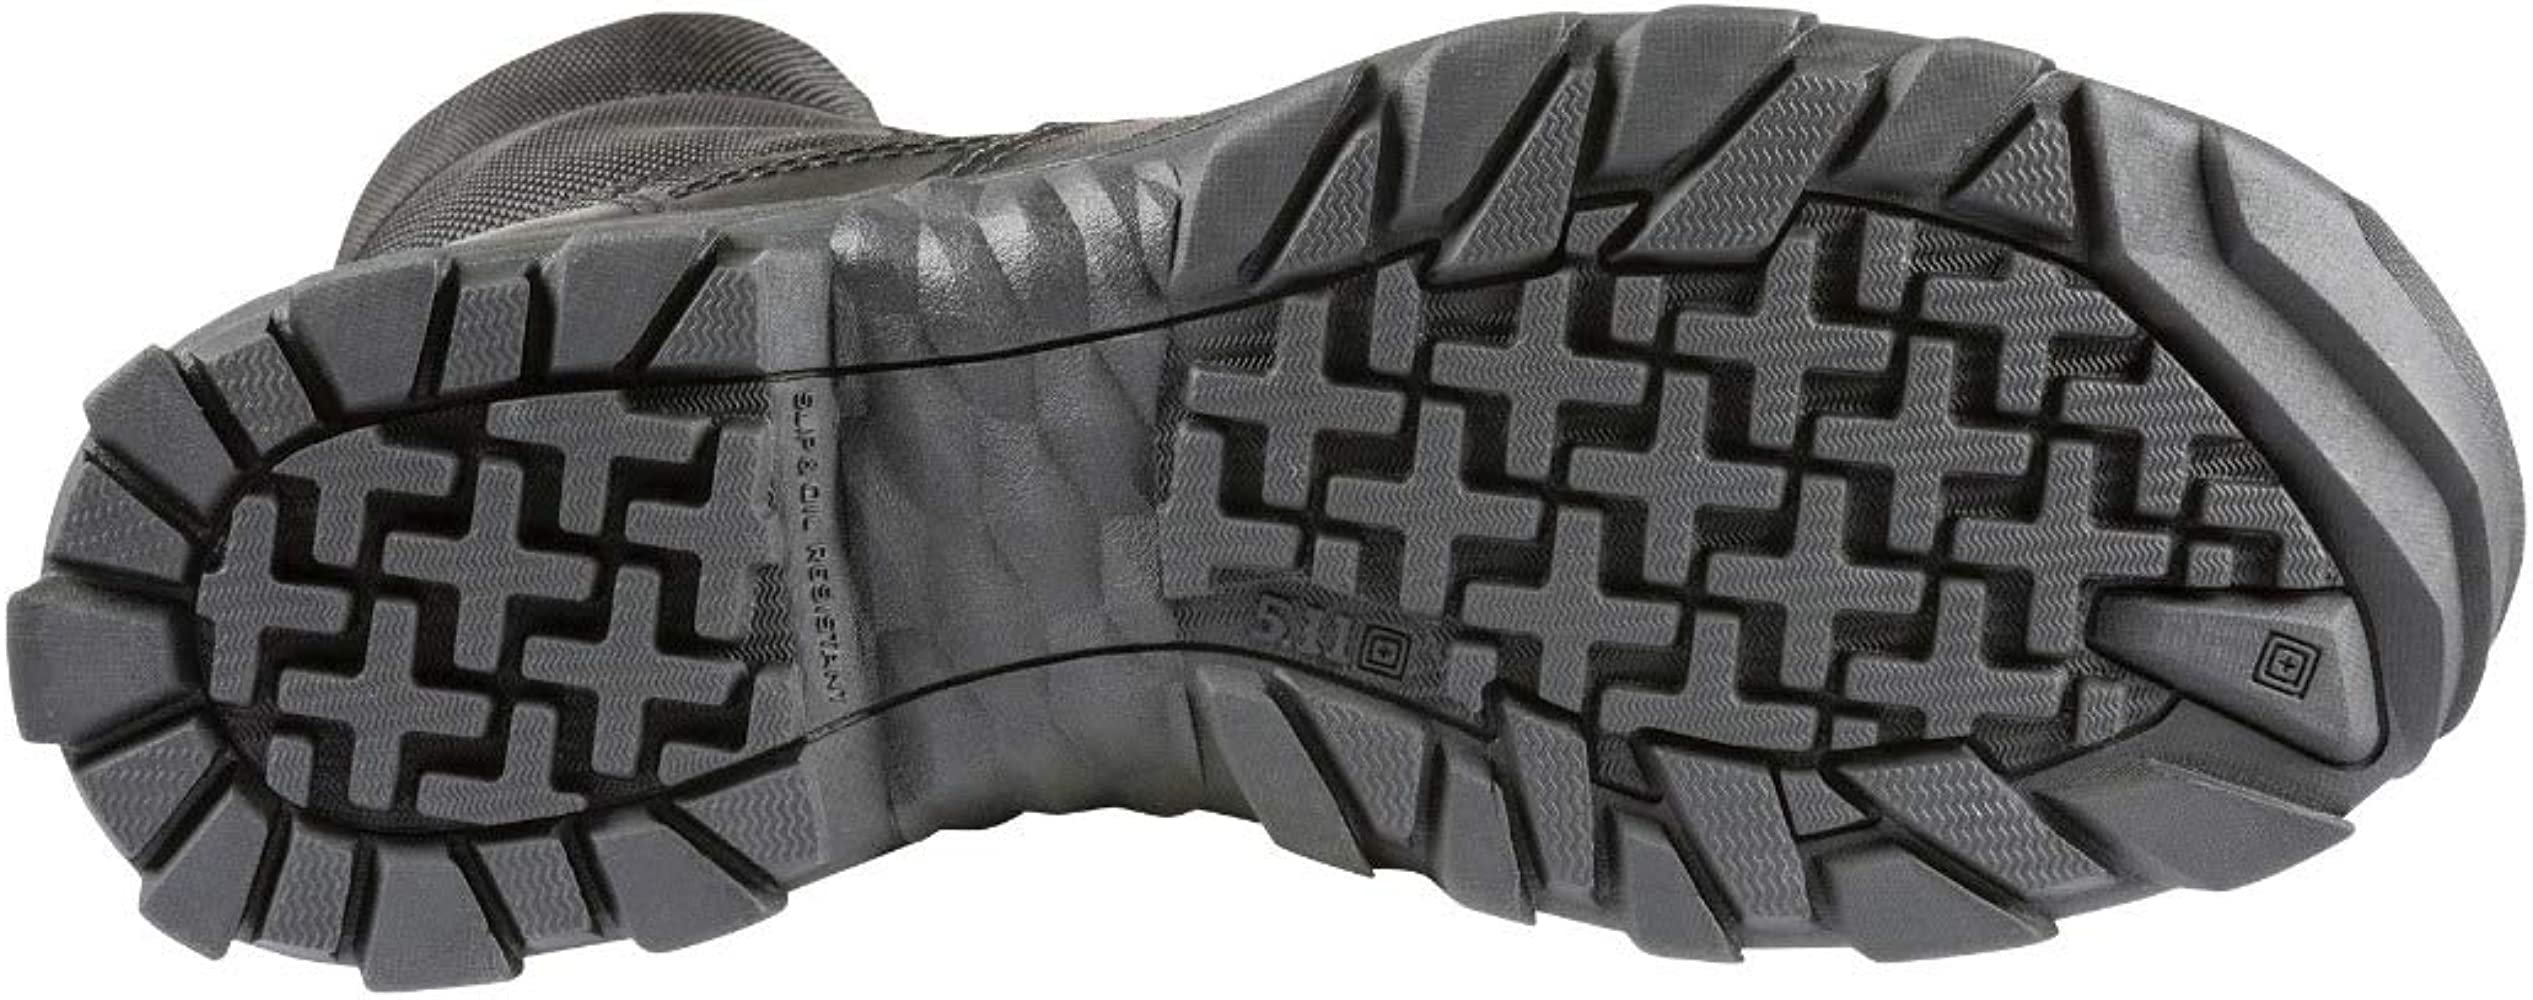 5.11 Work Gear Men's Speed 3.0 Urban Sidezip Boot, Ortholite Insole, Moisture Wicking, Black, 11.5 Wide, Style 12336 - image 5 of 6